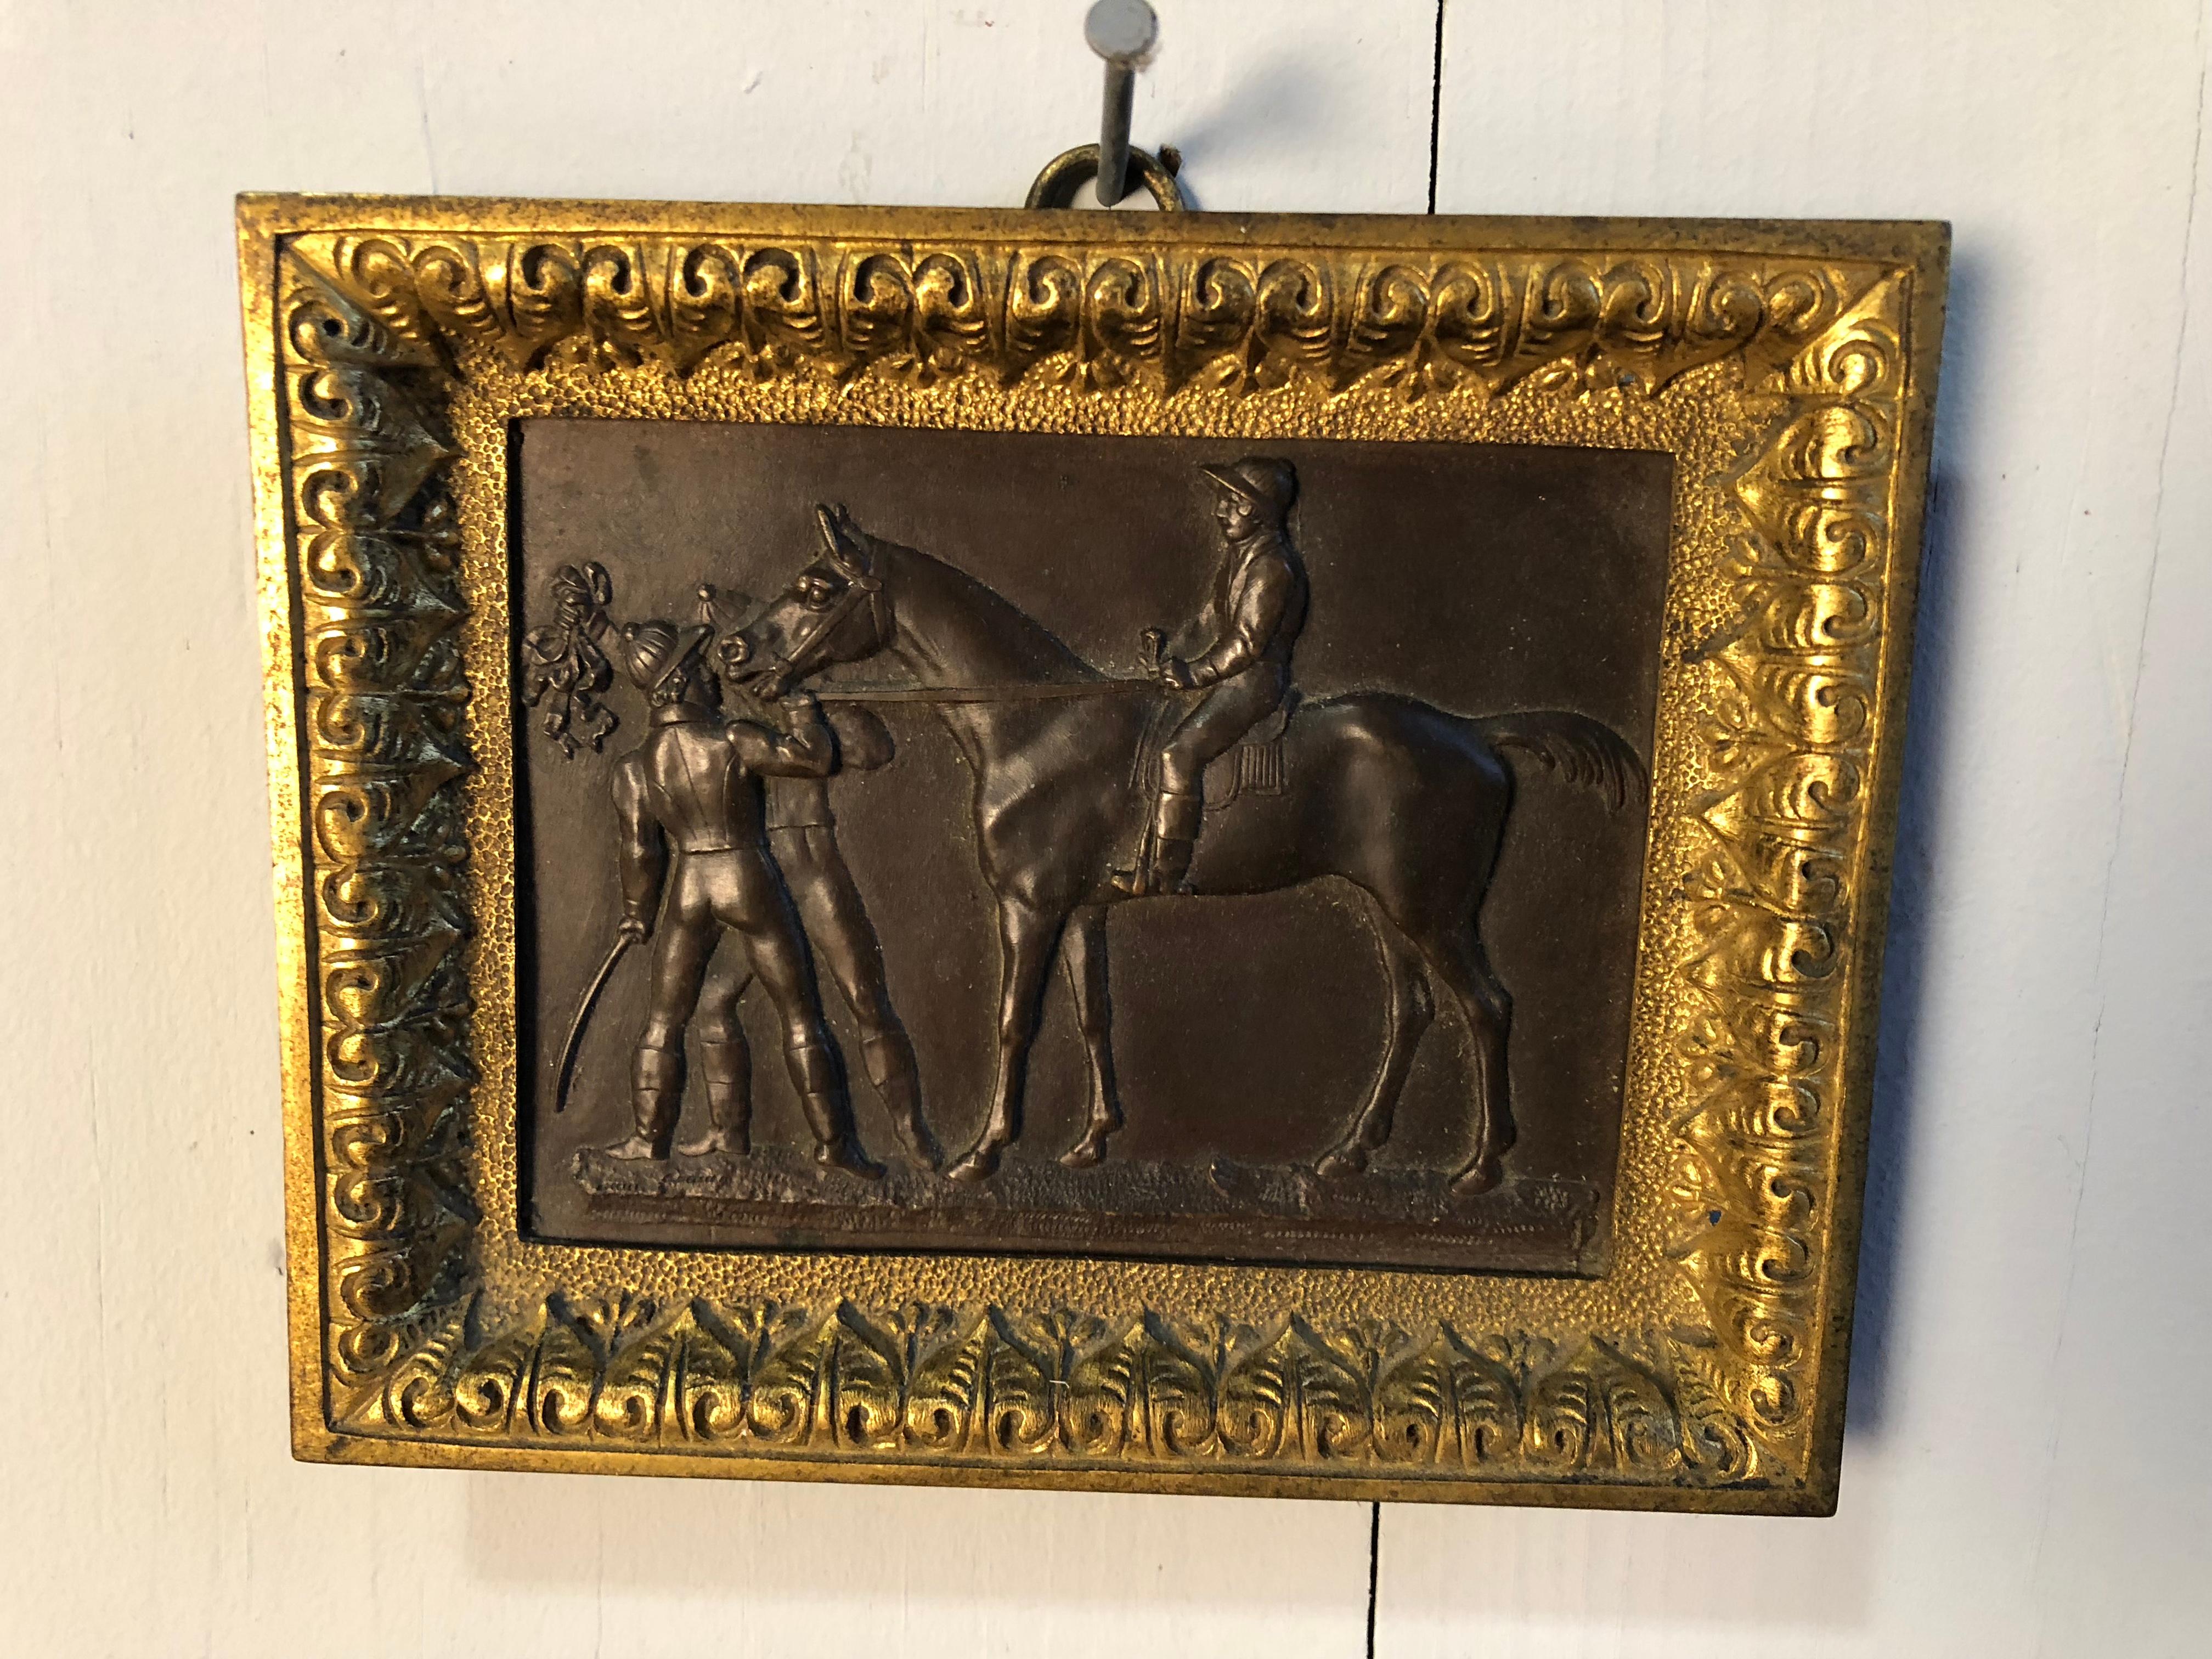 A small bronze and brass racehorse plaque, French 19th Century, possibly an award or medal for a race.